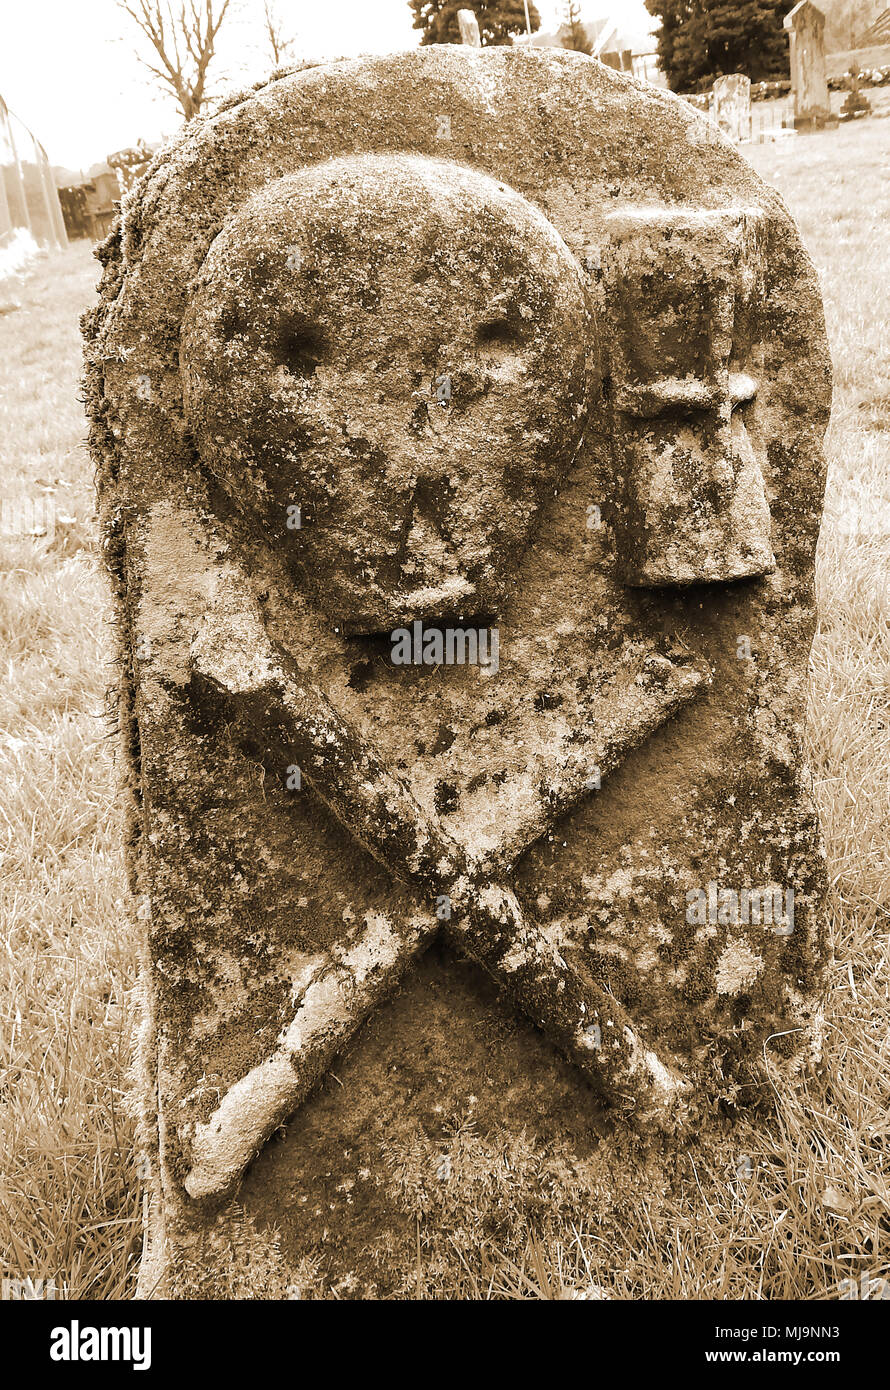 Ancient skull and crossbow symbolism on gravestones in a Dumfries and Galloway, Scotland, country graveyard. (Memento Mori)mortality Stock Photo